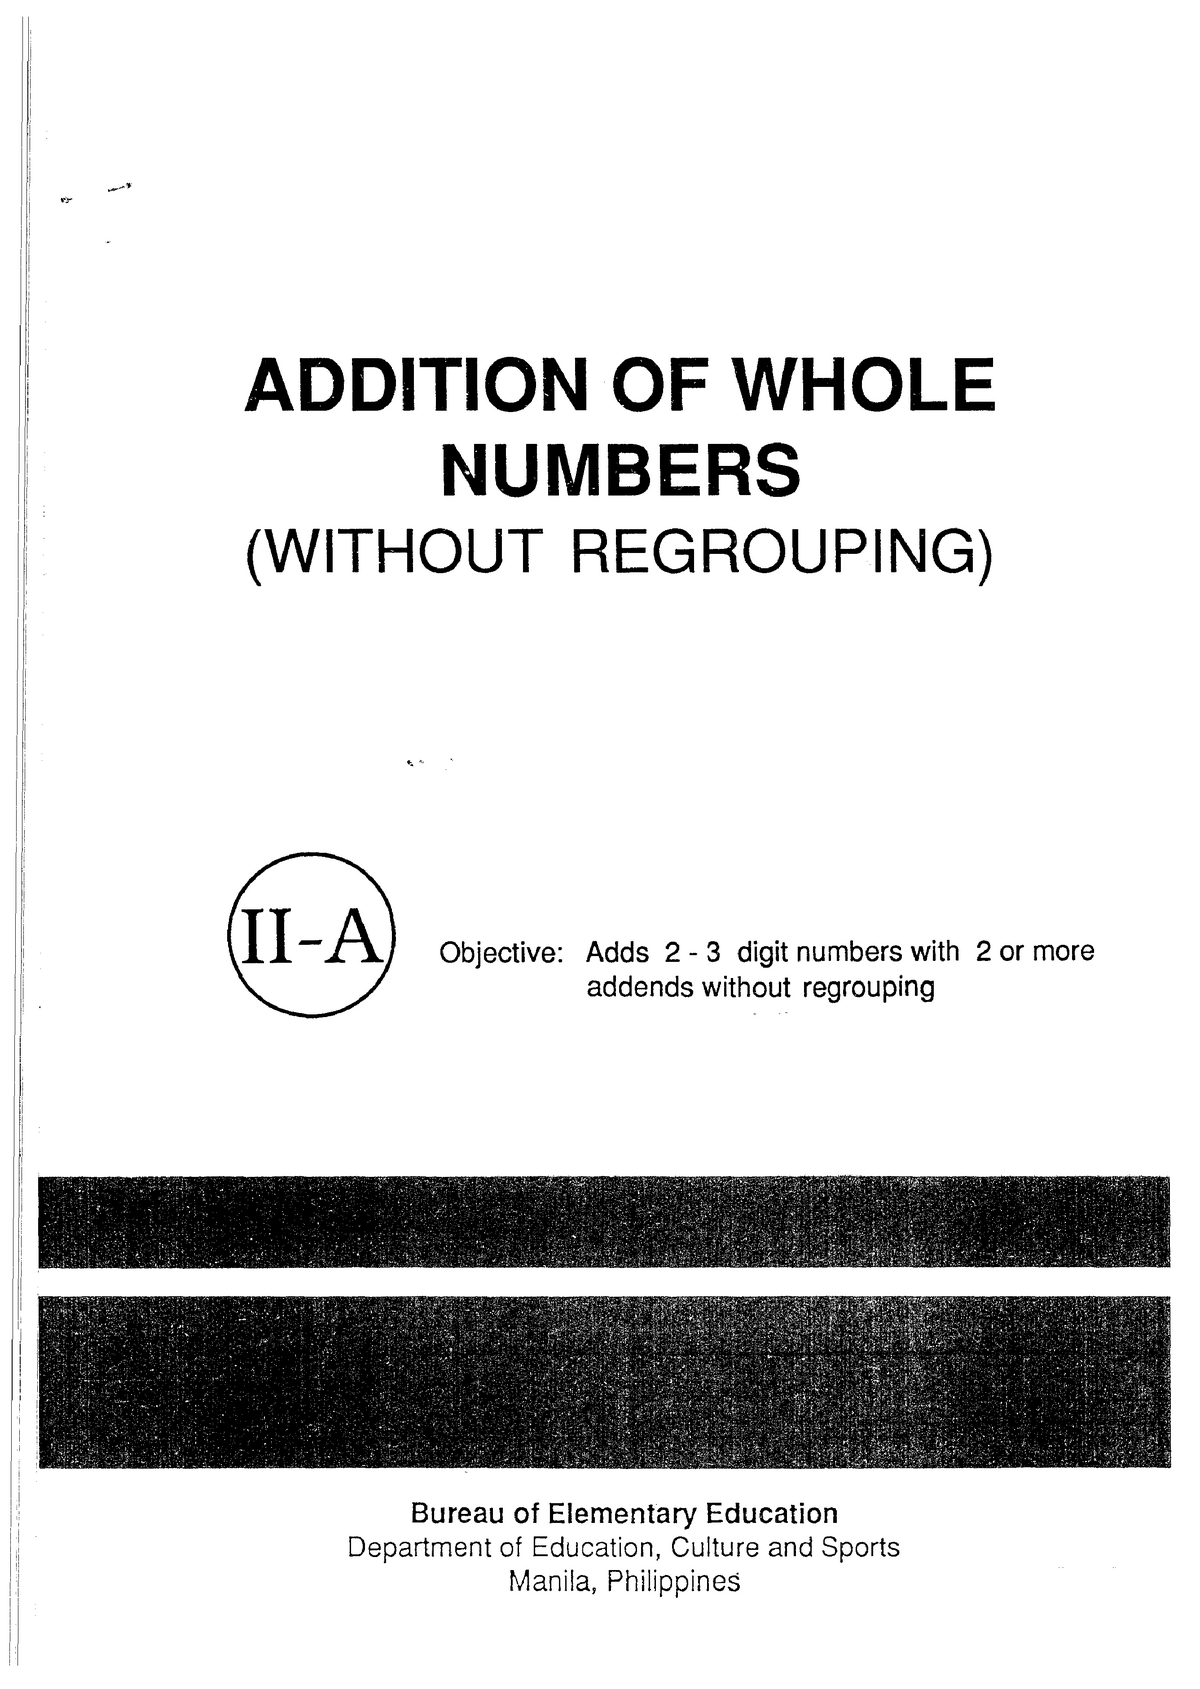 proded-math-ii-a-addition-of-whole-numbers-with-regrouping-addition